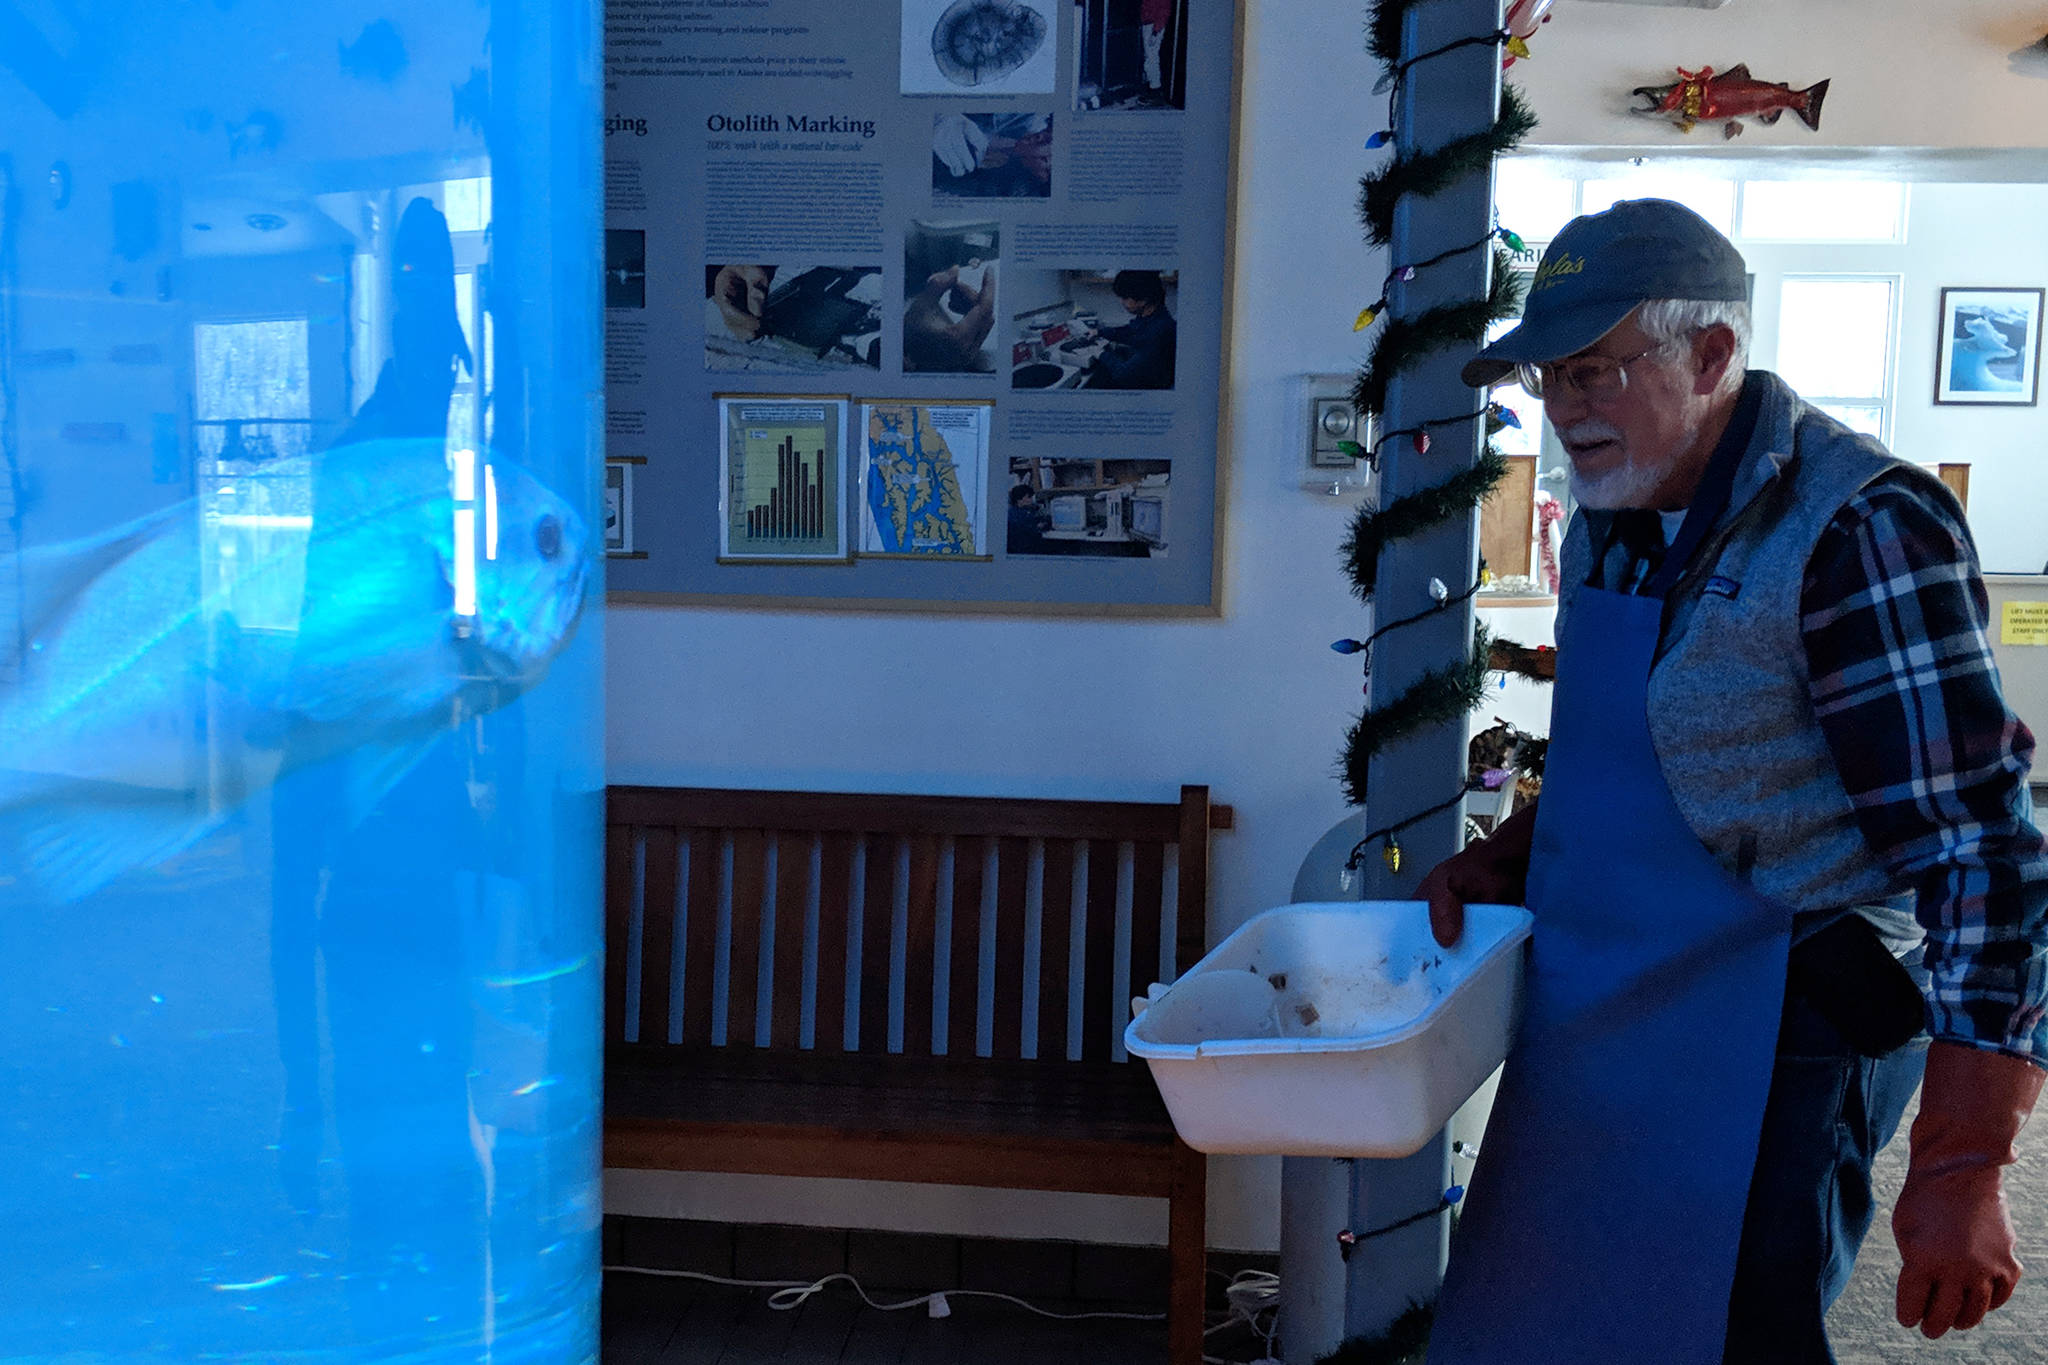 Rich Mattson approaches the large aquarium in the Ladd Macaulay Visitor Center on Dec. 24, 2018. For the past three decades, Mattson has maintained the aquariums in the center. (Ben Hohenstatt | Capital City Weekly)